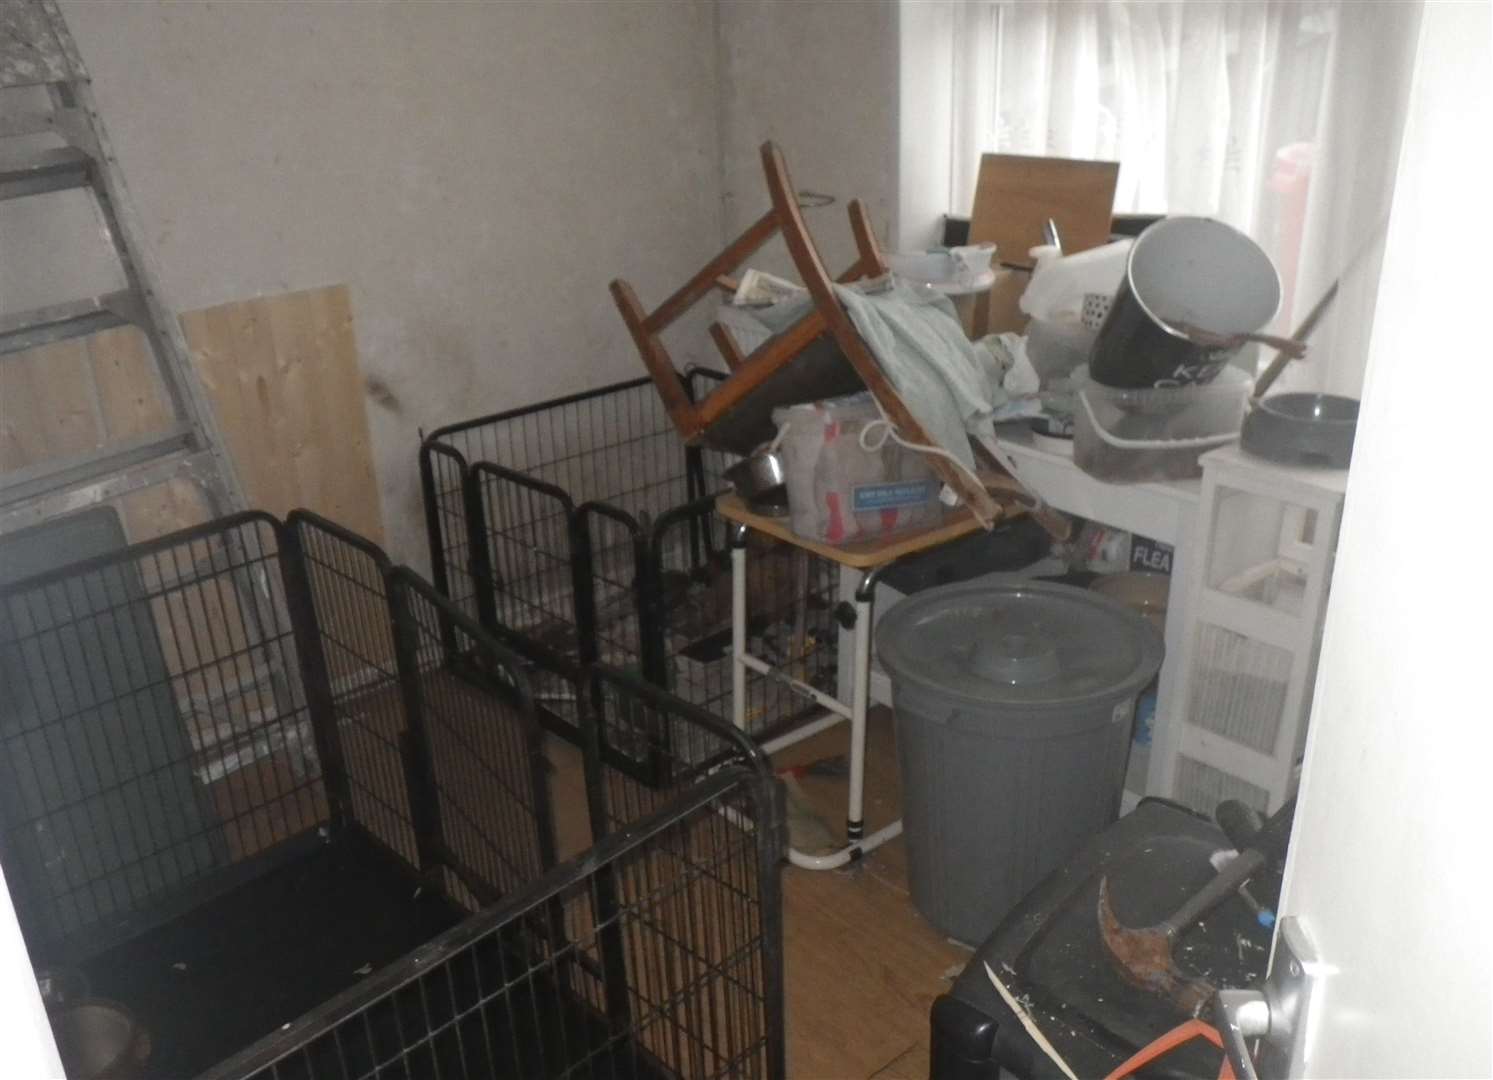 Inside Oxlade’s home on Sheppey. Picture: RSPCA